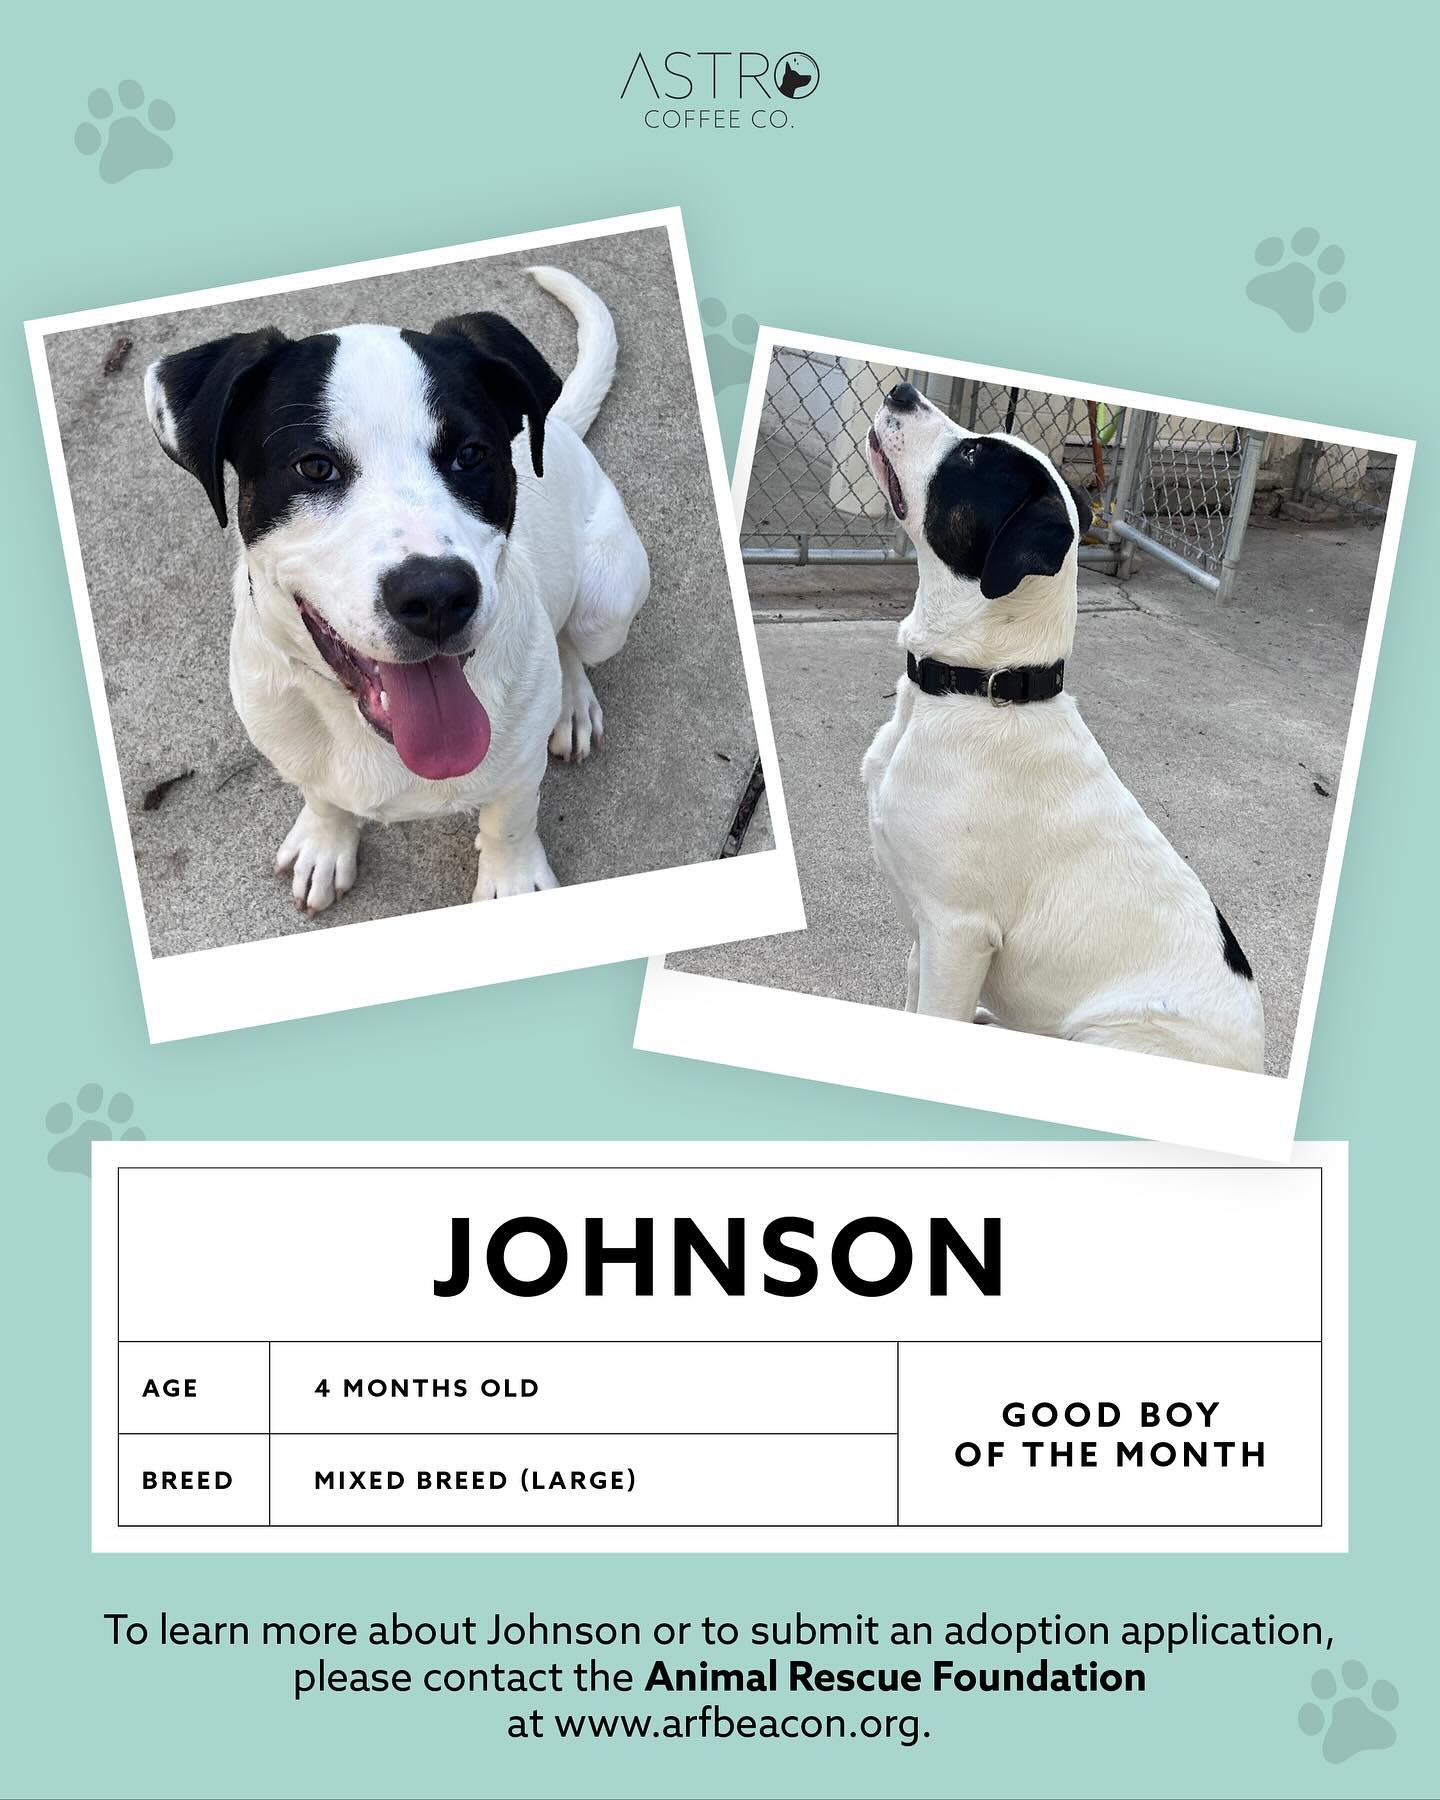 We are so happy to announce Johnson as Astro Coffee Co.&rsquo;s first Good Boy of the Month! 

Johnson is an adorable, friendly mixed breed puppy! He is a super loveable and goofy guy. He is 4 months old and looking like he will grow to be a fairly l